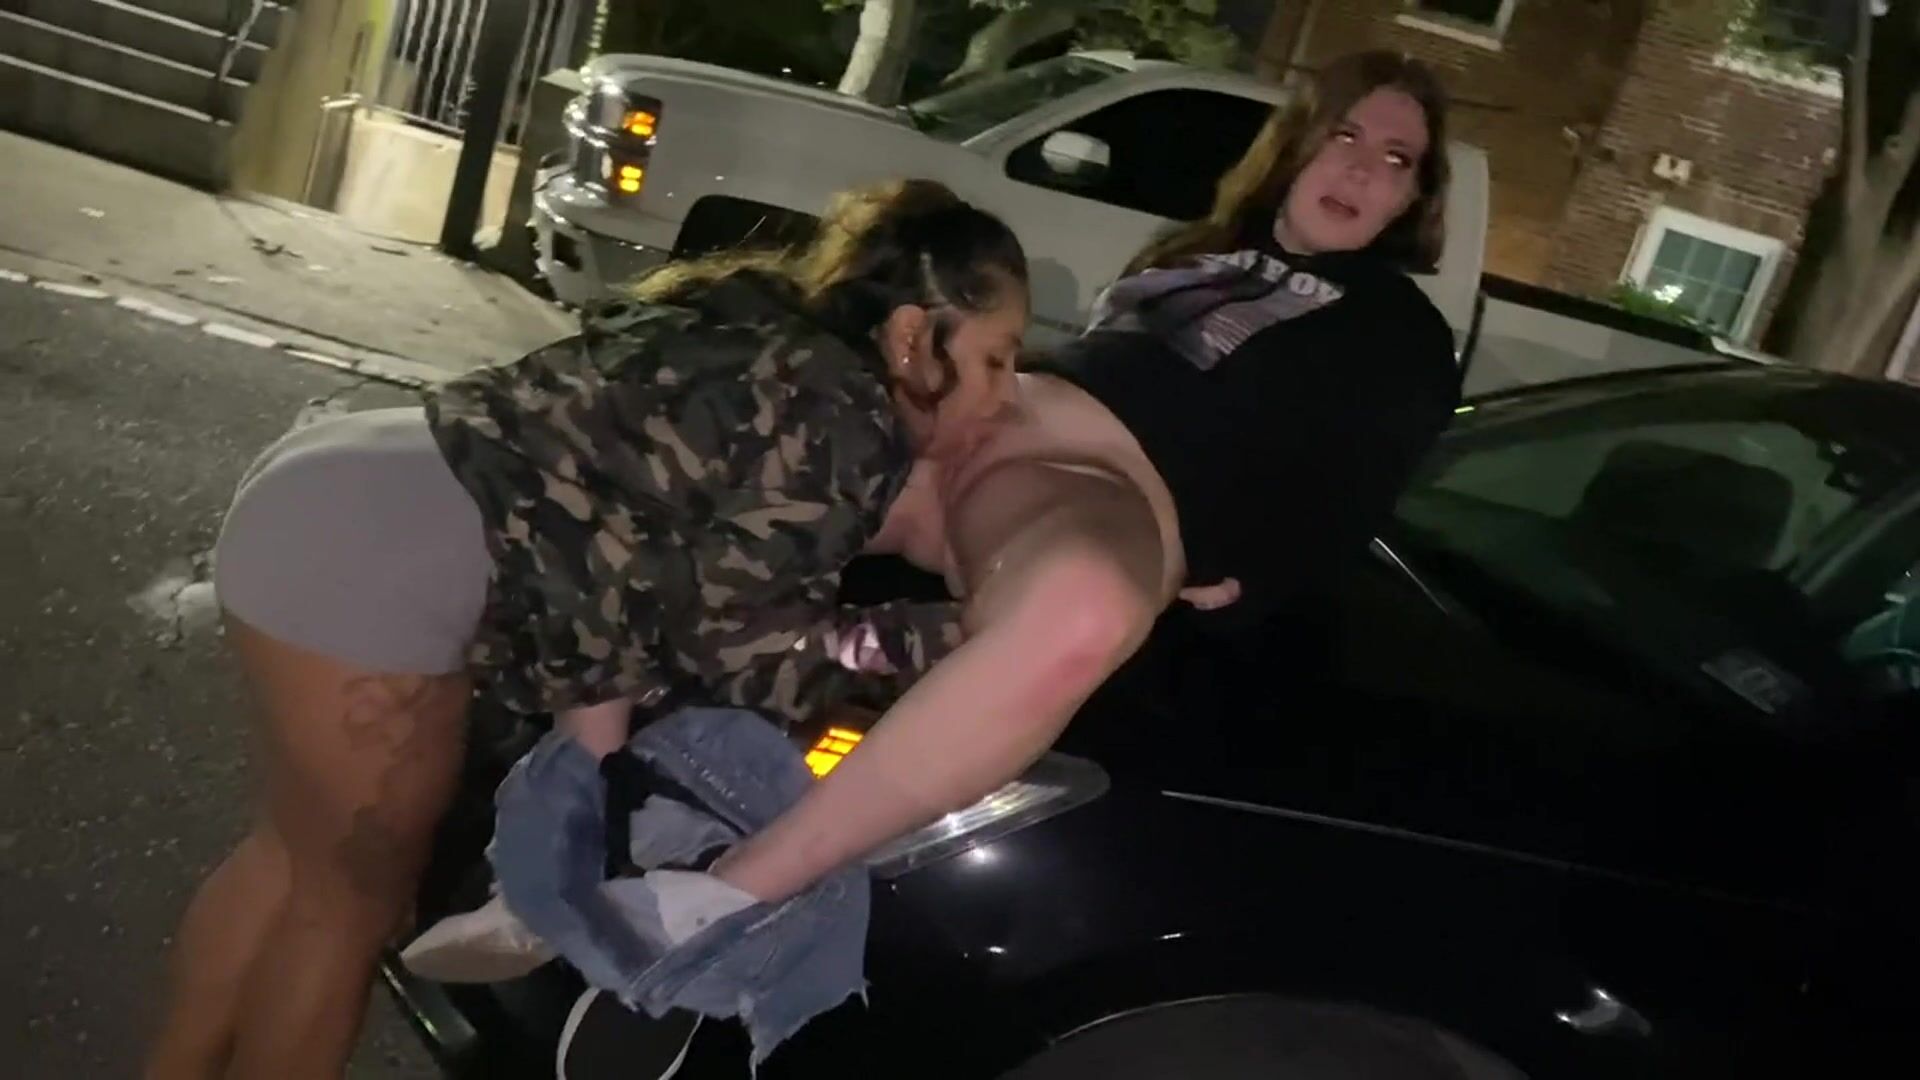 Truth or dare with my best friend ended up with me eating her pussy in the middle of the street ! pic